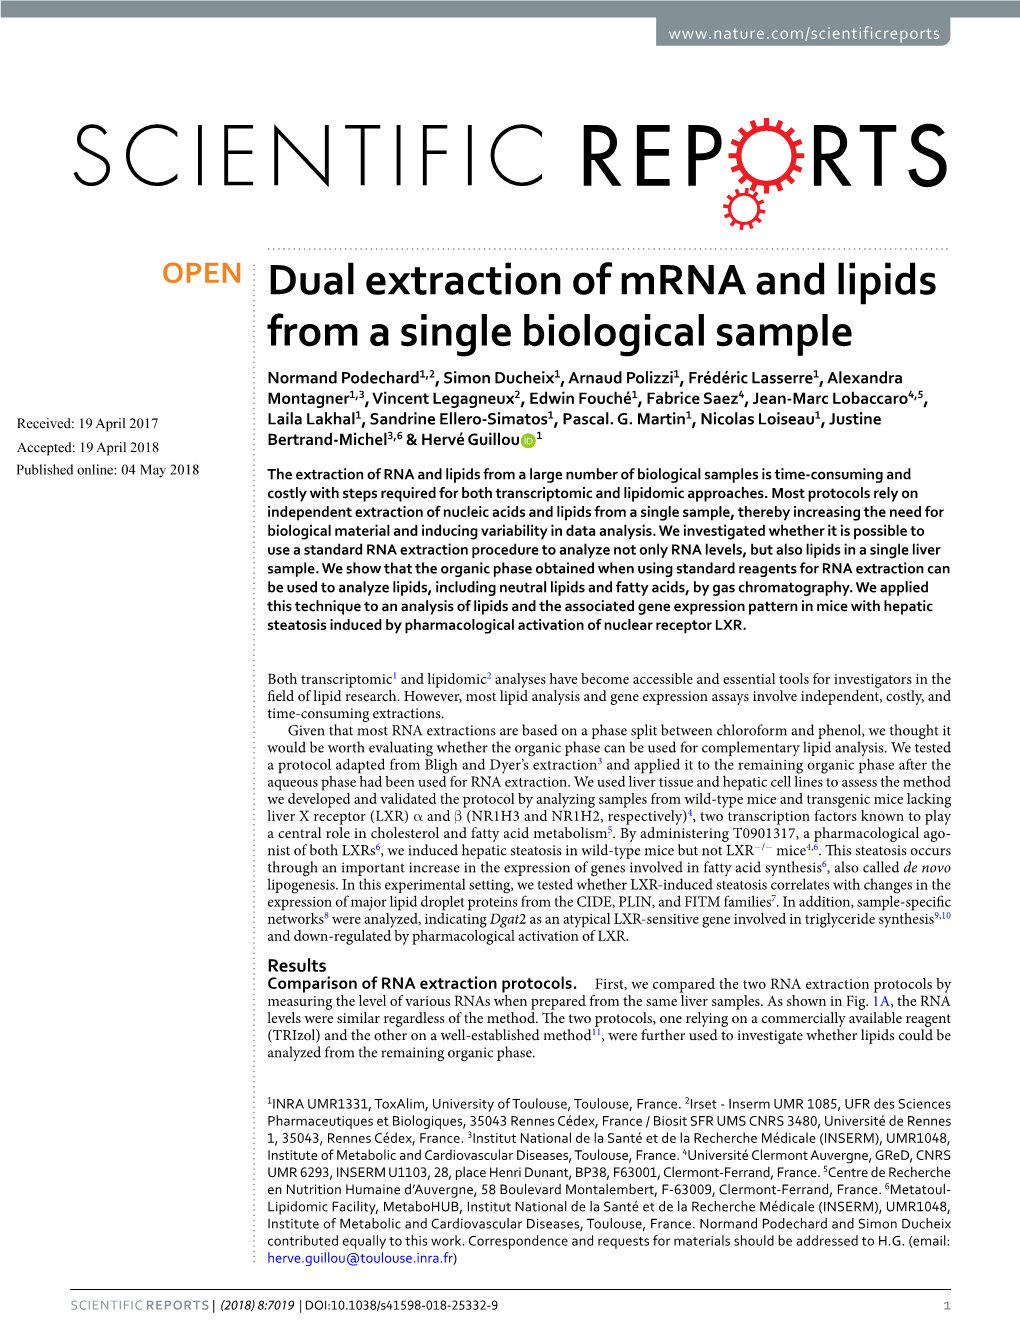 Dual Extraction of Mrna and Lipids from a Single Biological Sample